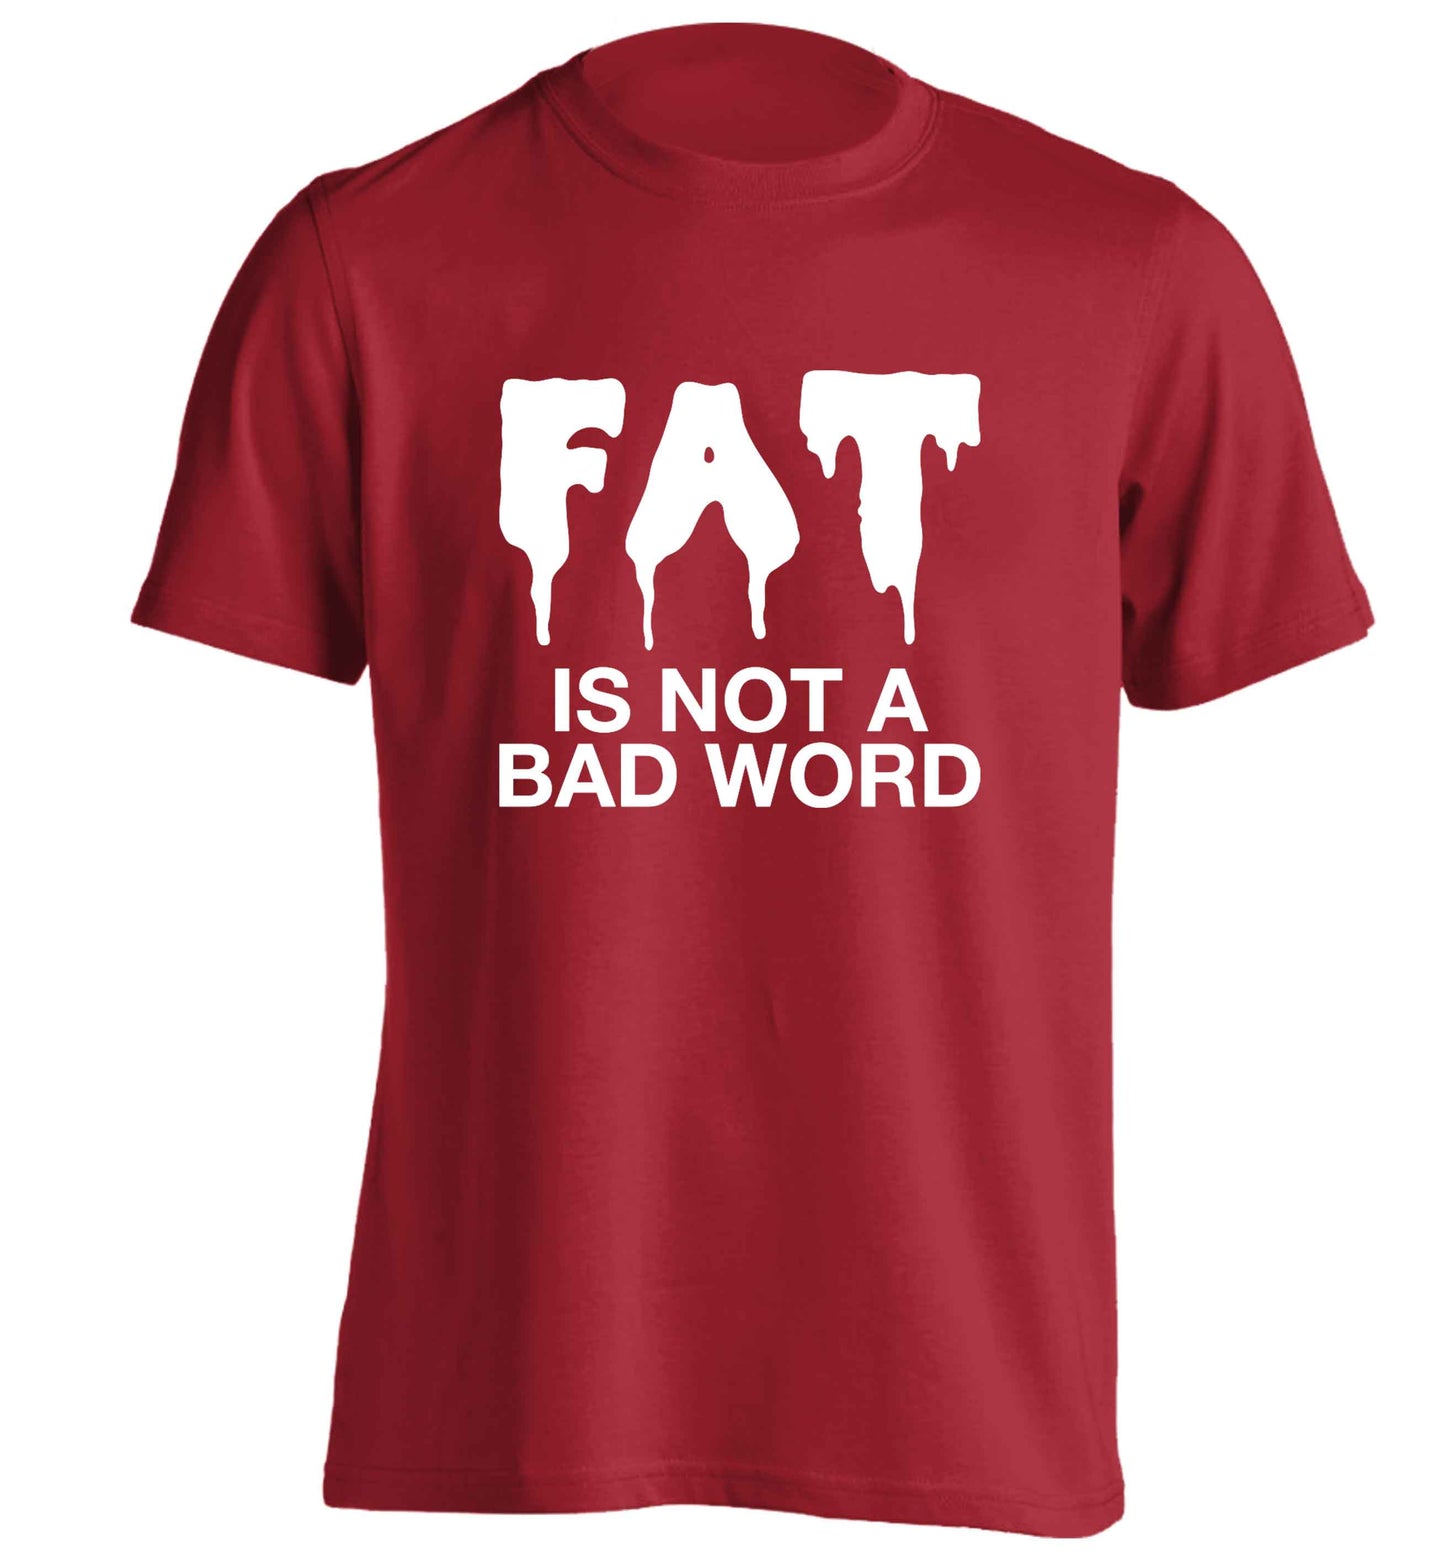 Fat is not a bad word adults unisex red Tshirt 2XL